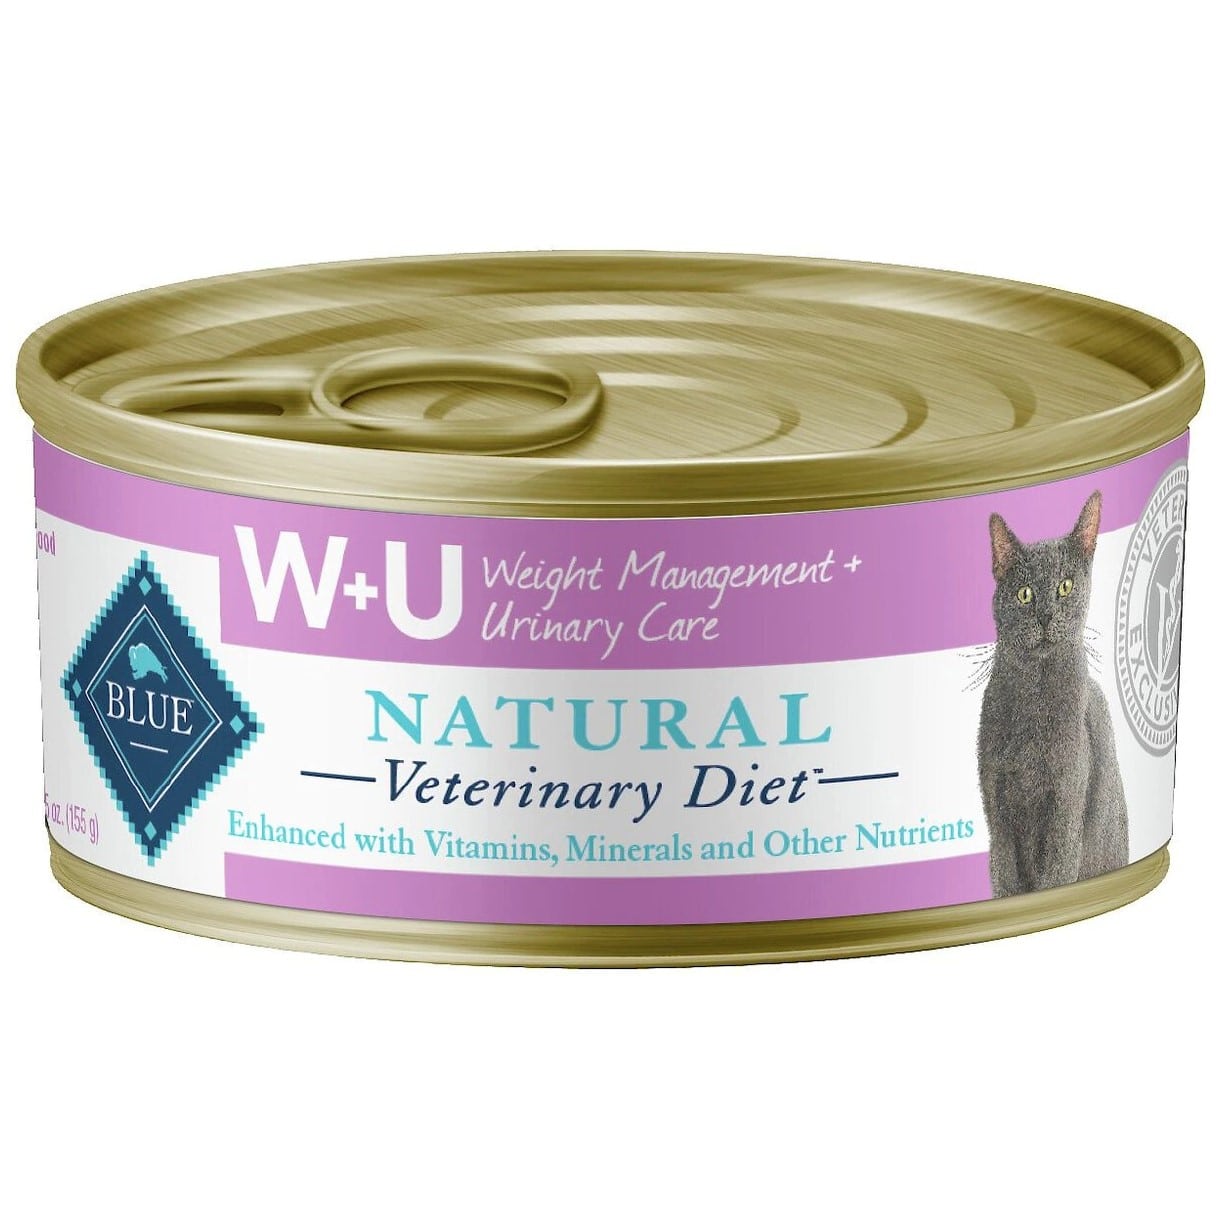 Blue Buffalo Natural Veterinary Diet W+U Weight Management + Urinary Care Grain-Free Wet Cat Food